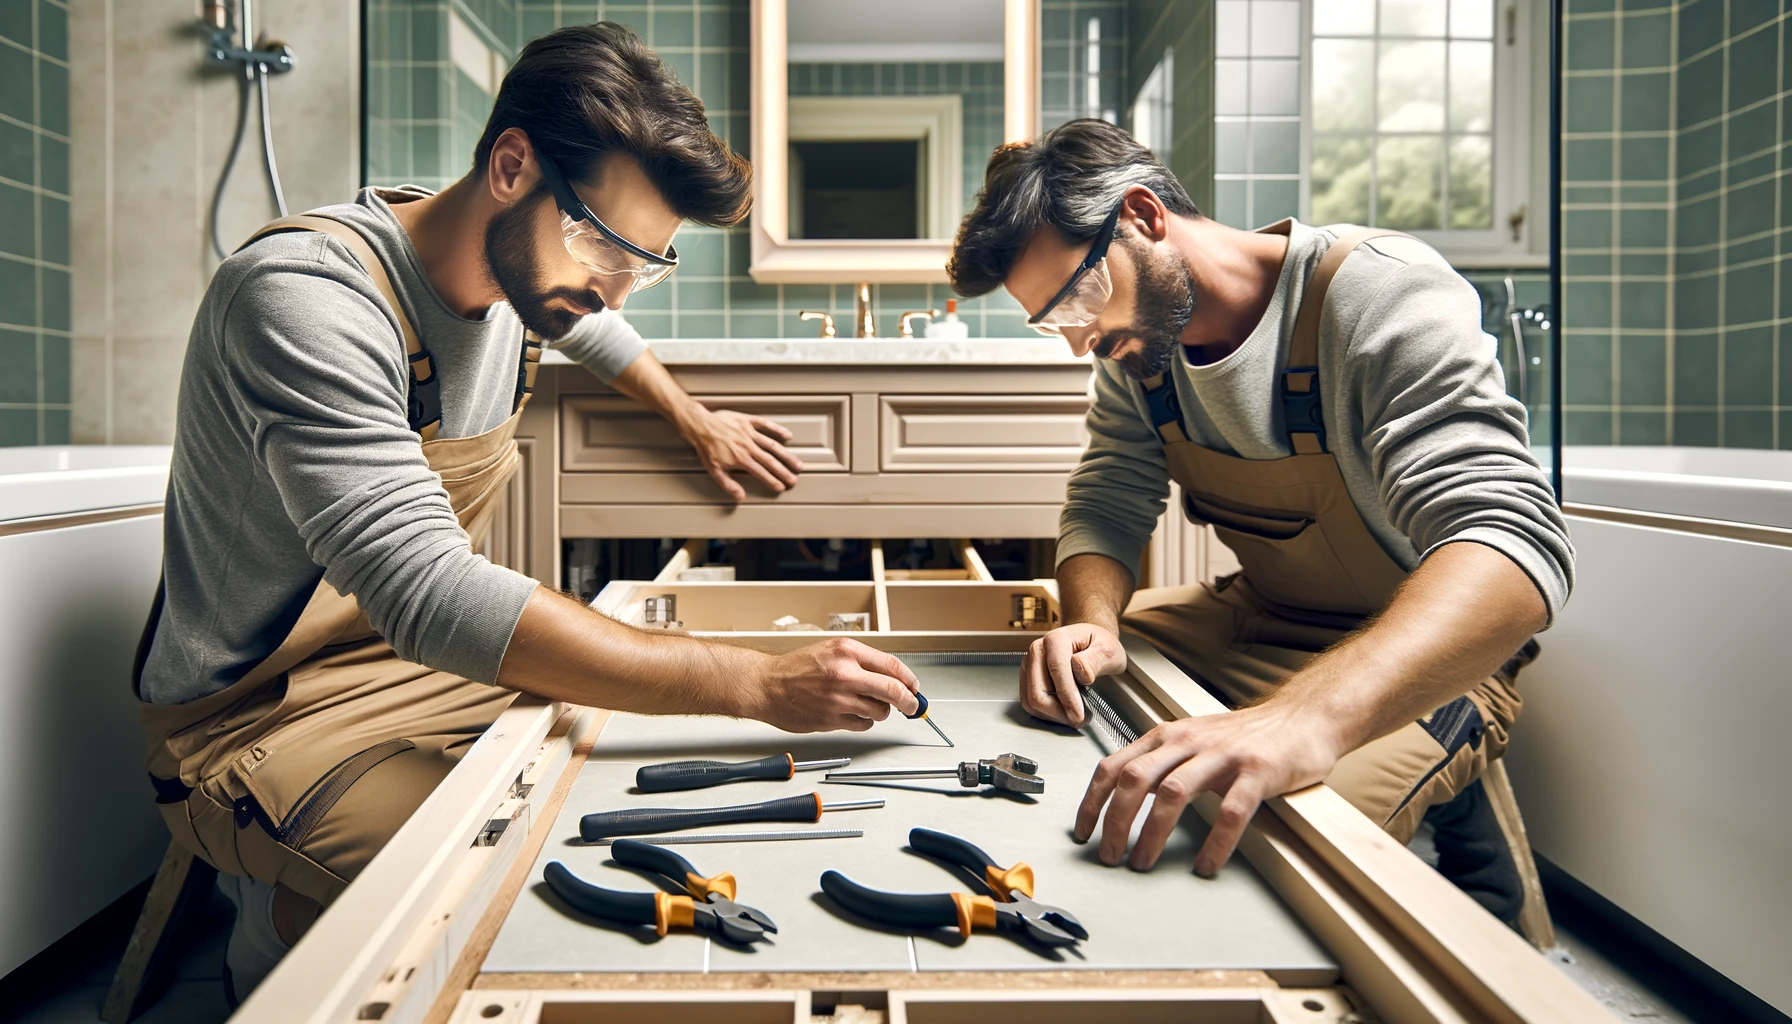 two skilled craftsmen in a bright, under-renovation bathroom, focused on meticulously installing a custom vanity.